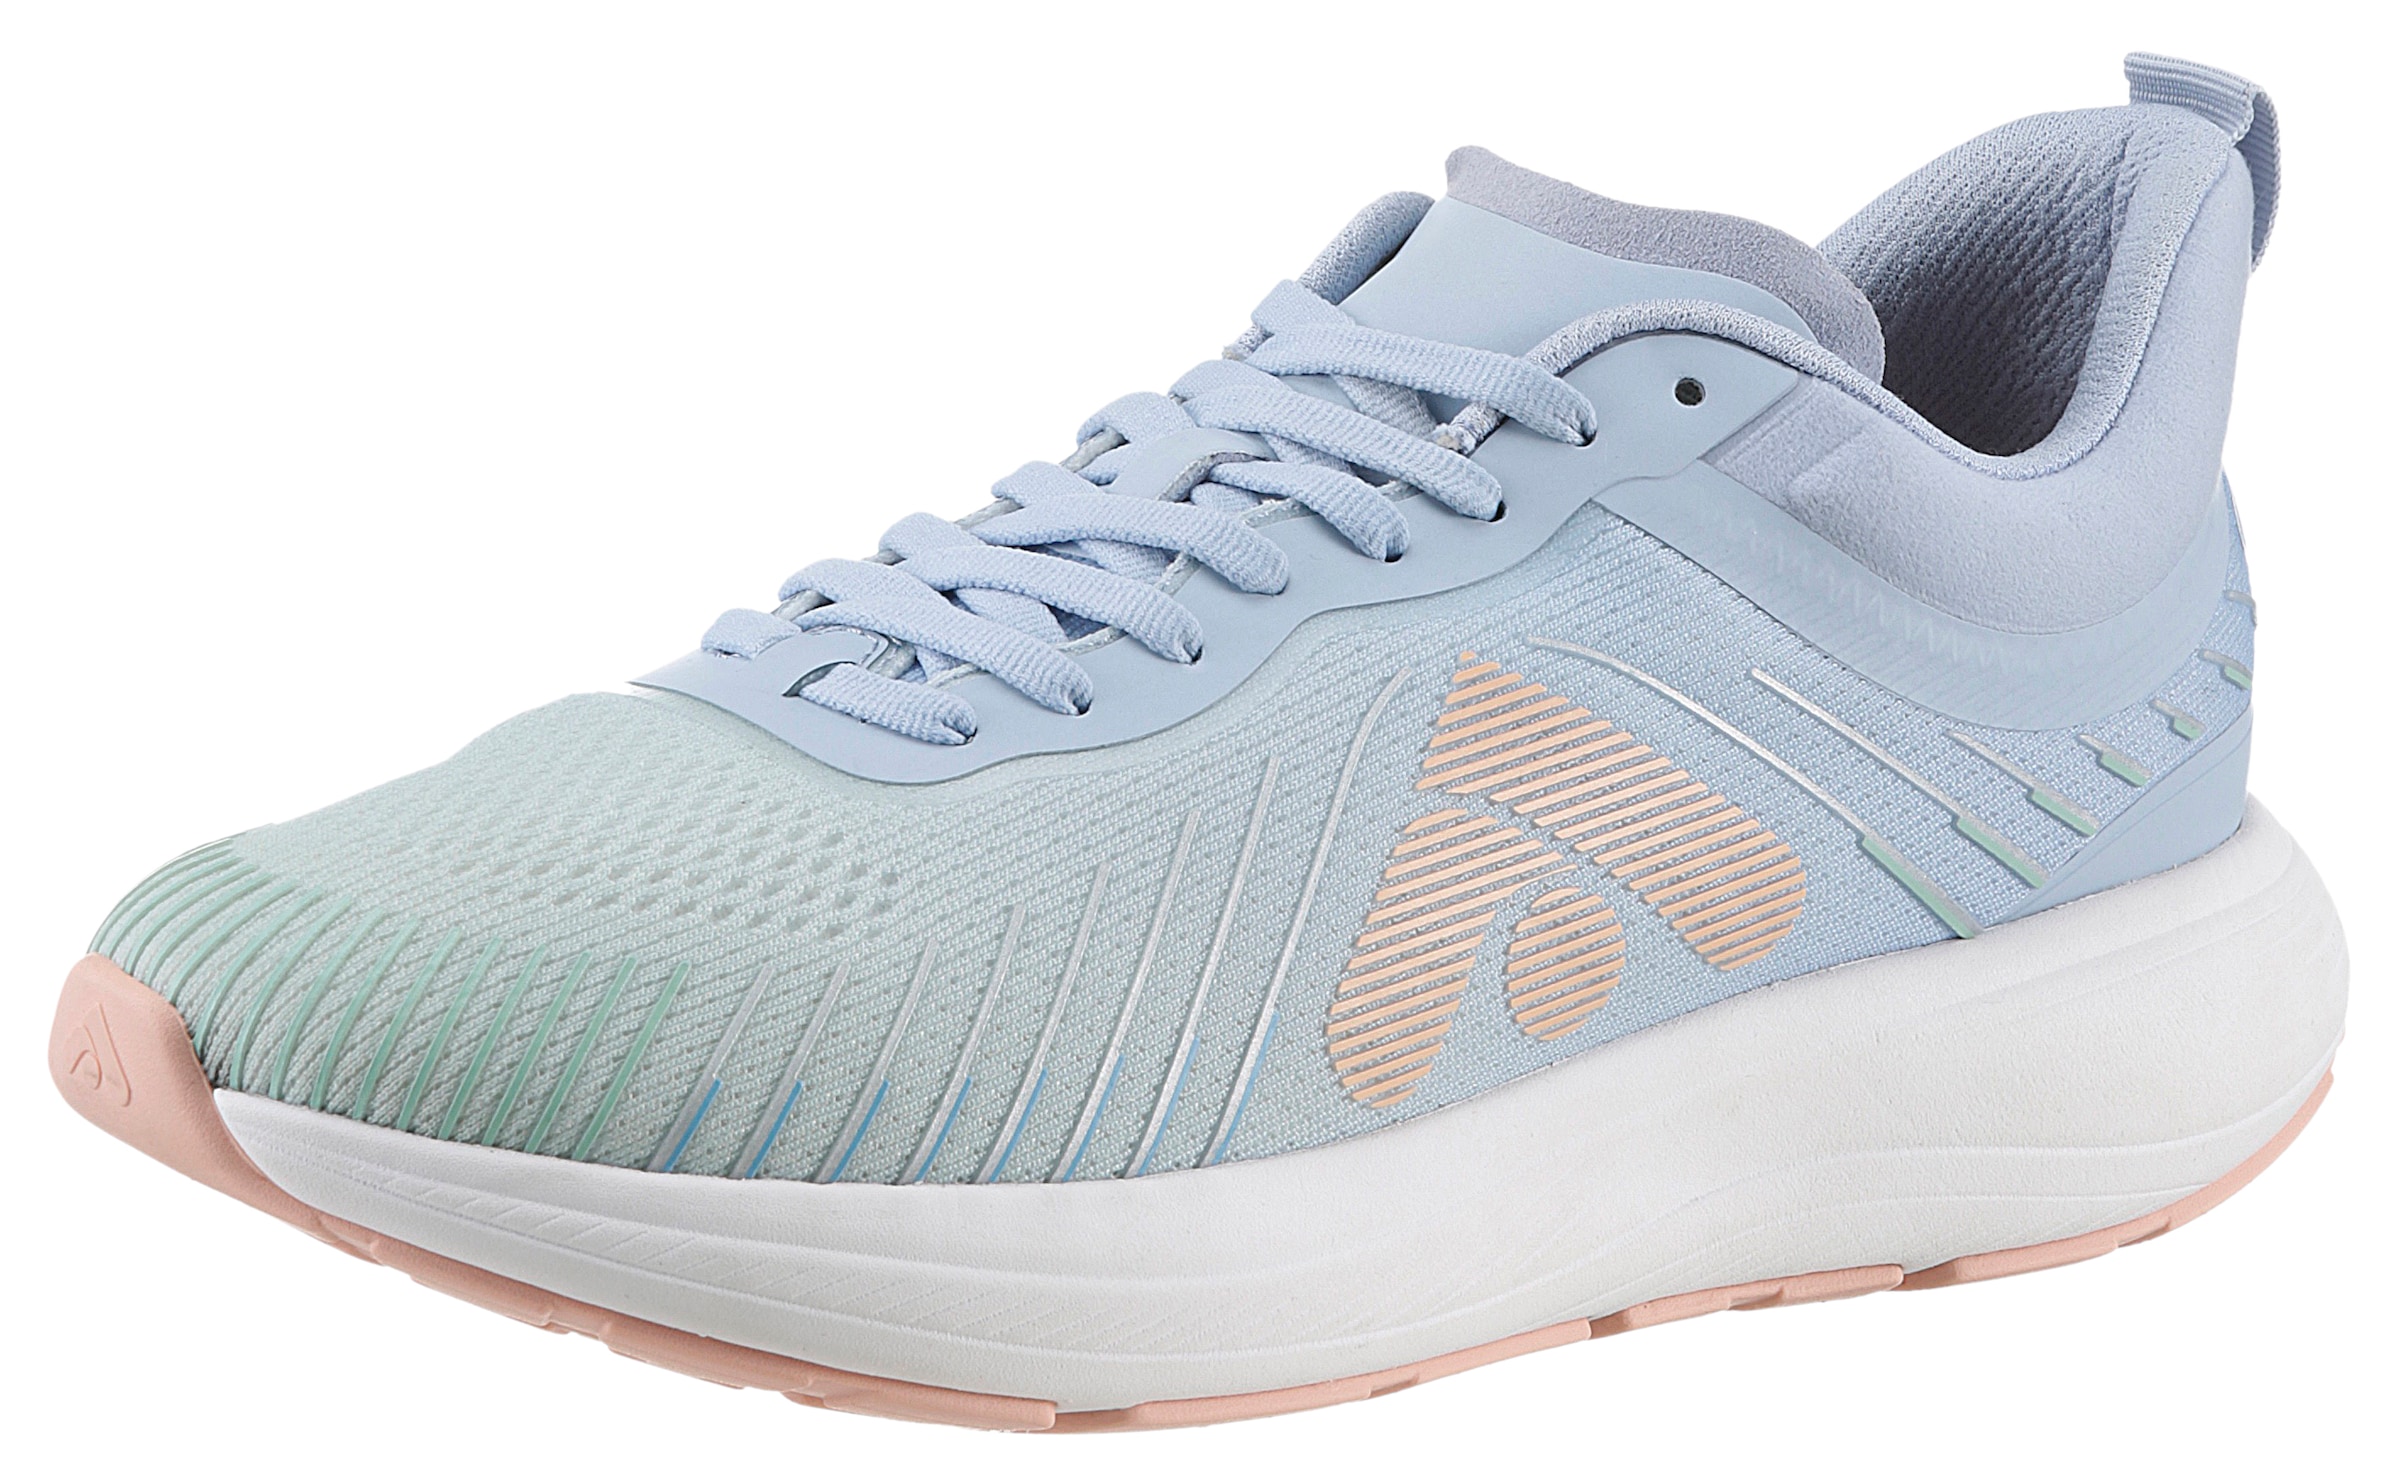 Fitflop Sneaker »FF RUNNER OMBRE-EDITION tinkl...